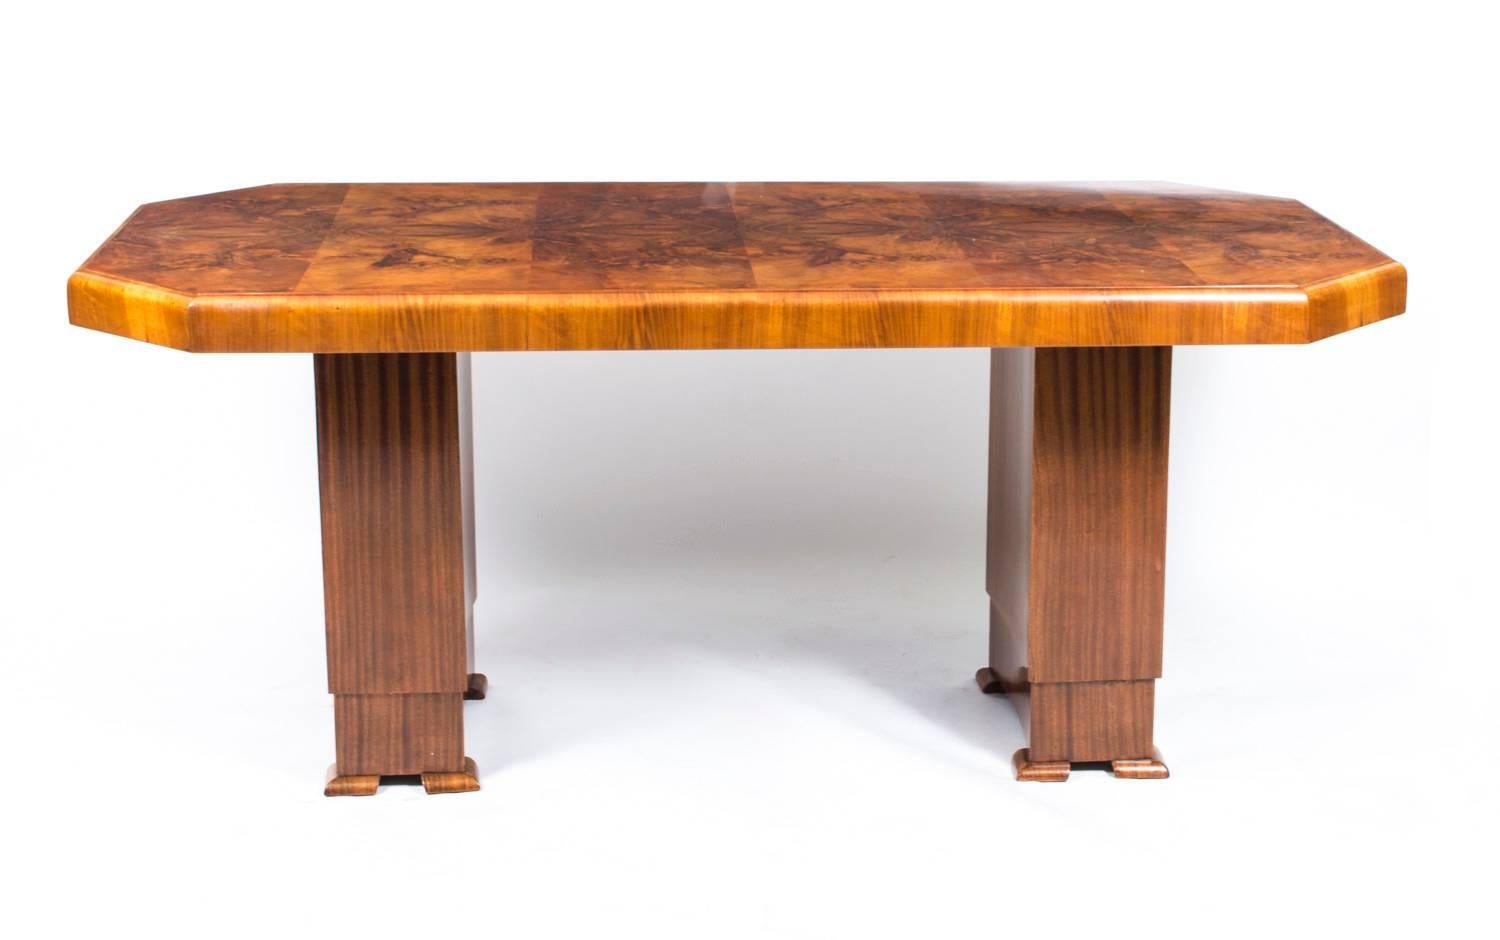 This beautiful antique Art Deco dining table dates from 1930. Crafted in burr walnut, it can comfortably seat six people.

Standing on twin pedestal supports which terminate in four contrasting colour wooden feet on each pedestal, this antique